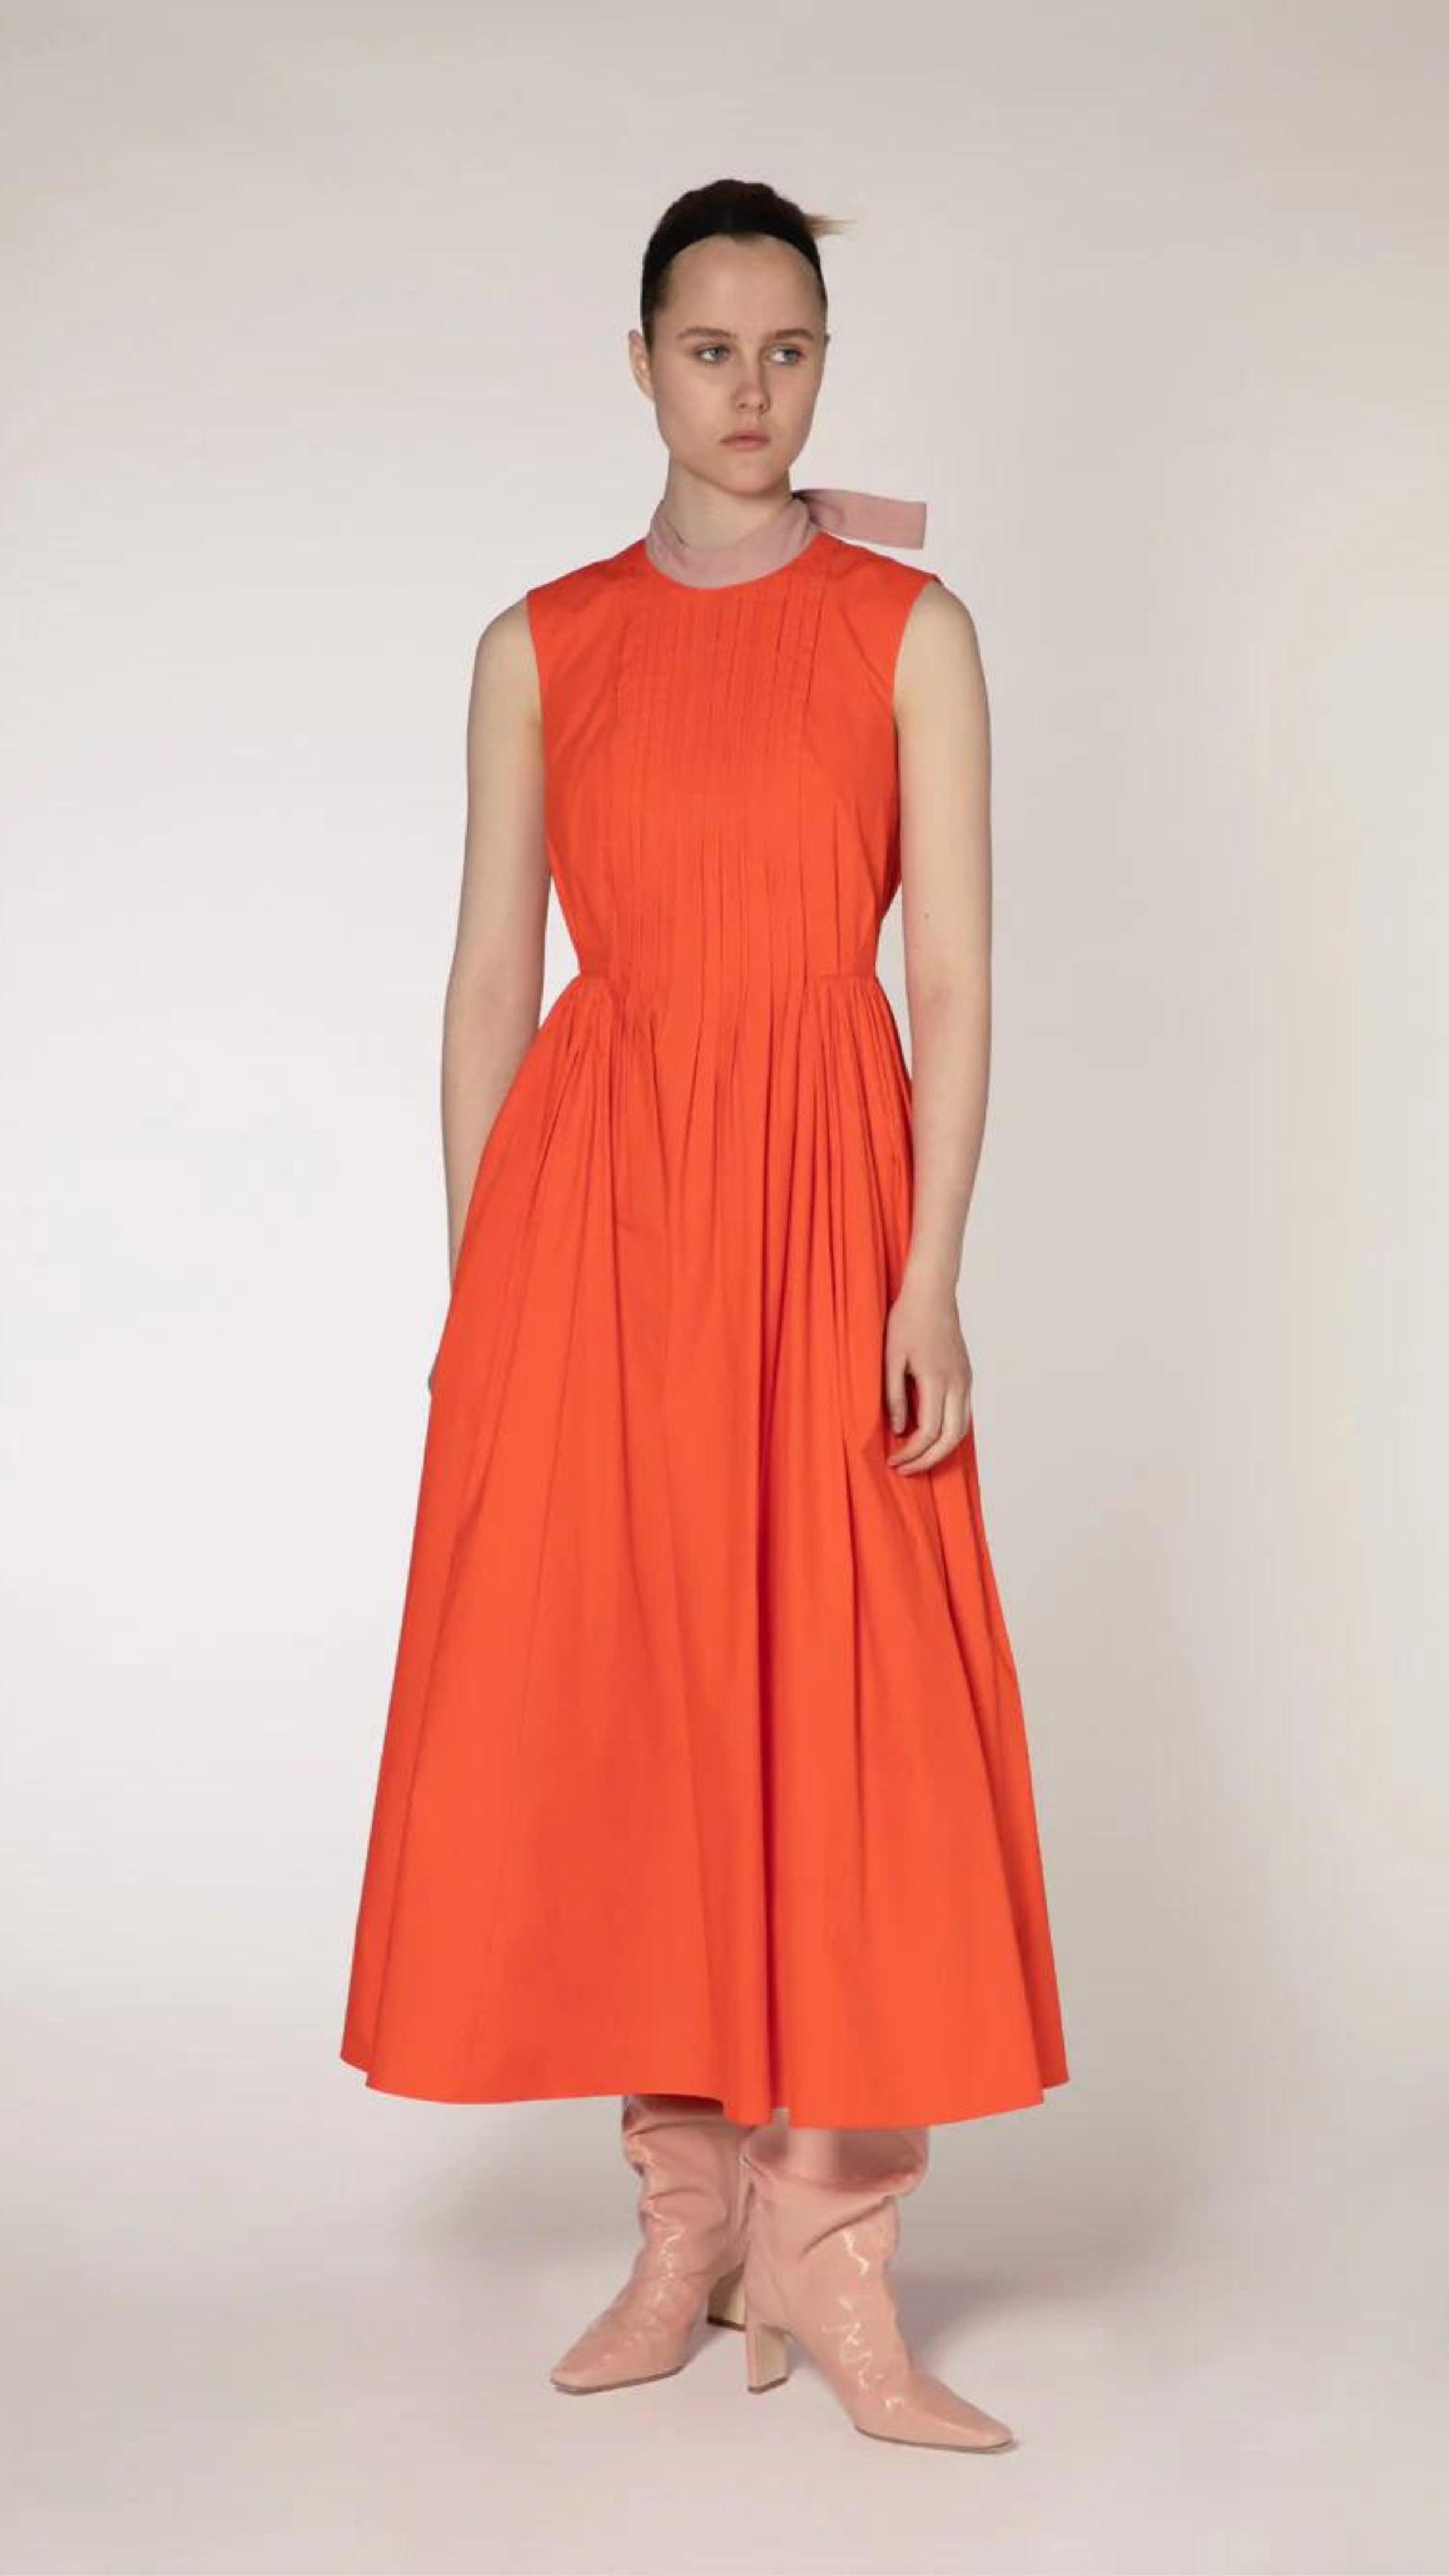 Roksanda The Prinesa Dress. Classic elegant orange cotton dress with a rounded neckline, fitted waist and pleated midi length skirt. Highlighted with a pale pink ribbon collar that ties at the nape of the neck. Shown on model facing front.